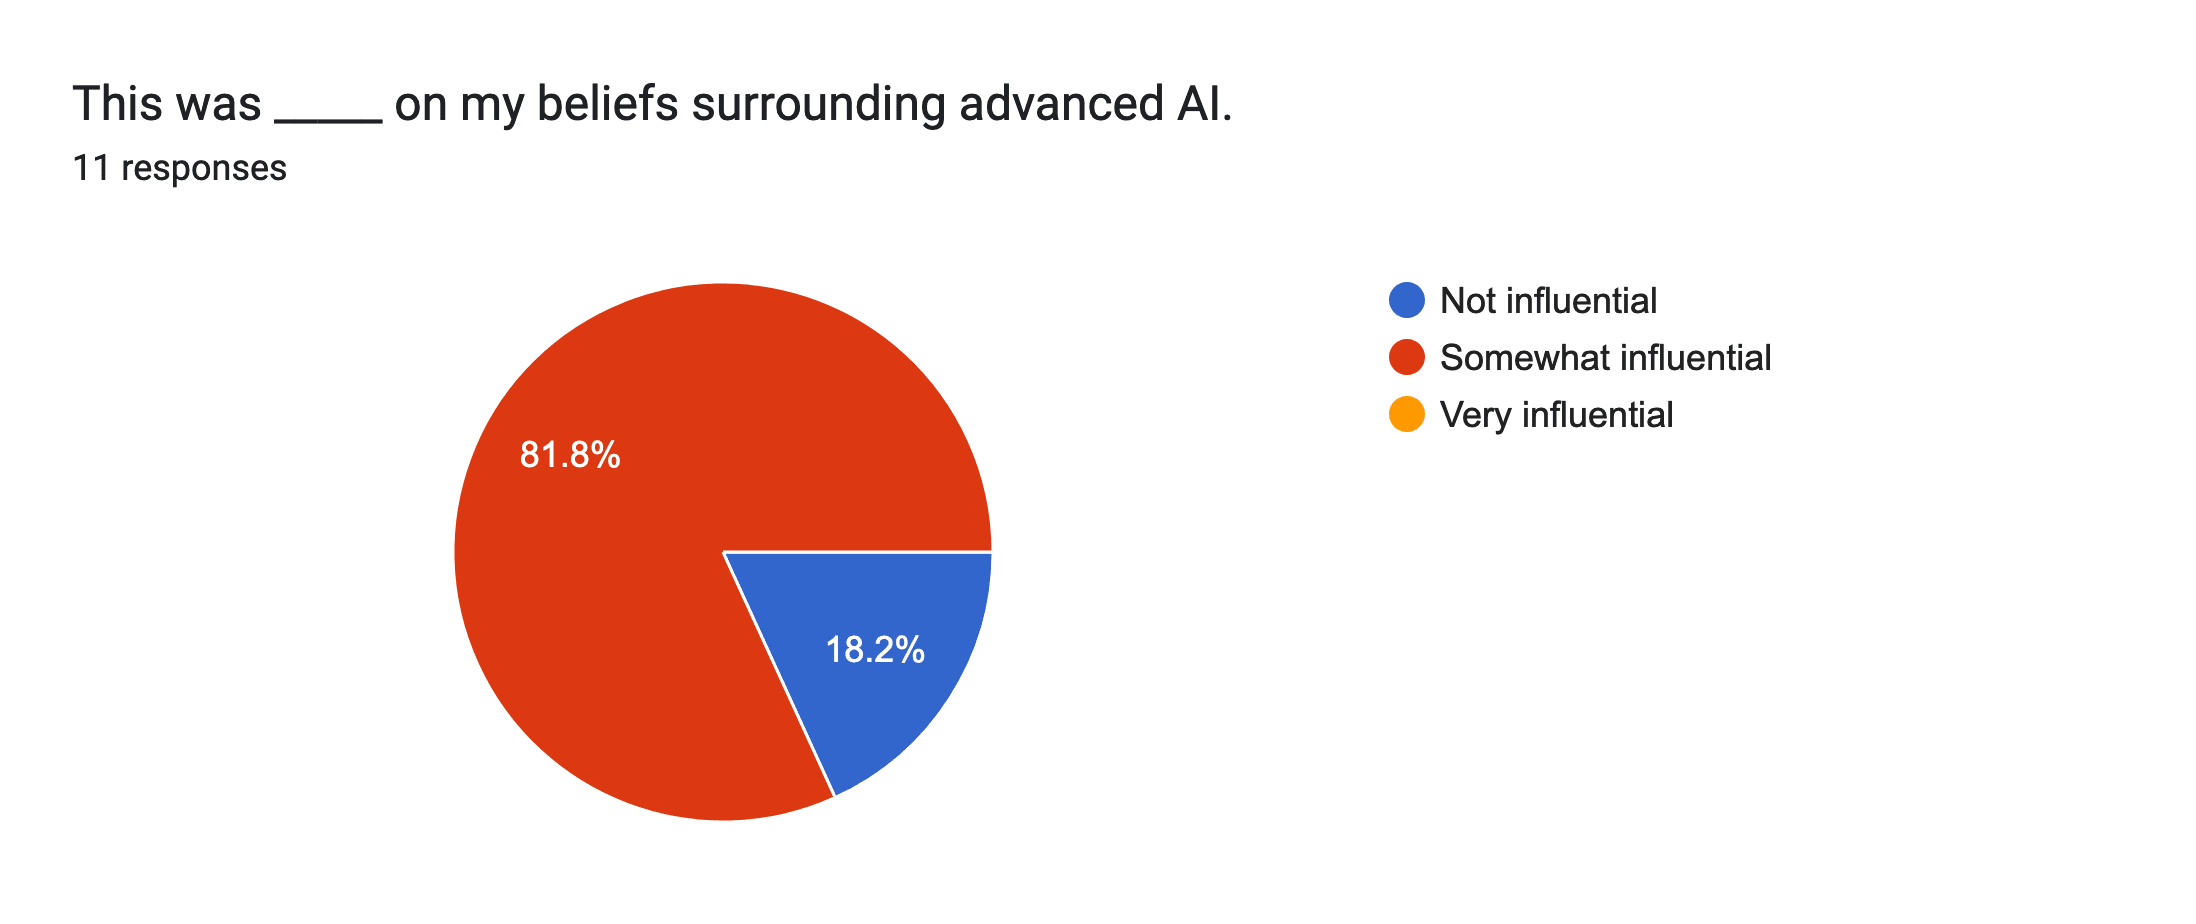 Forms response chart. Question title: This was _____ on my beliefs surrounding advanced AI.
. Number of responses: 11 responses.